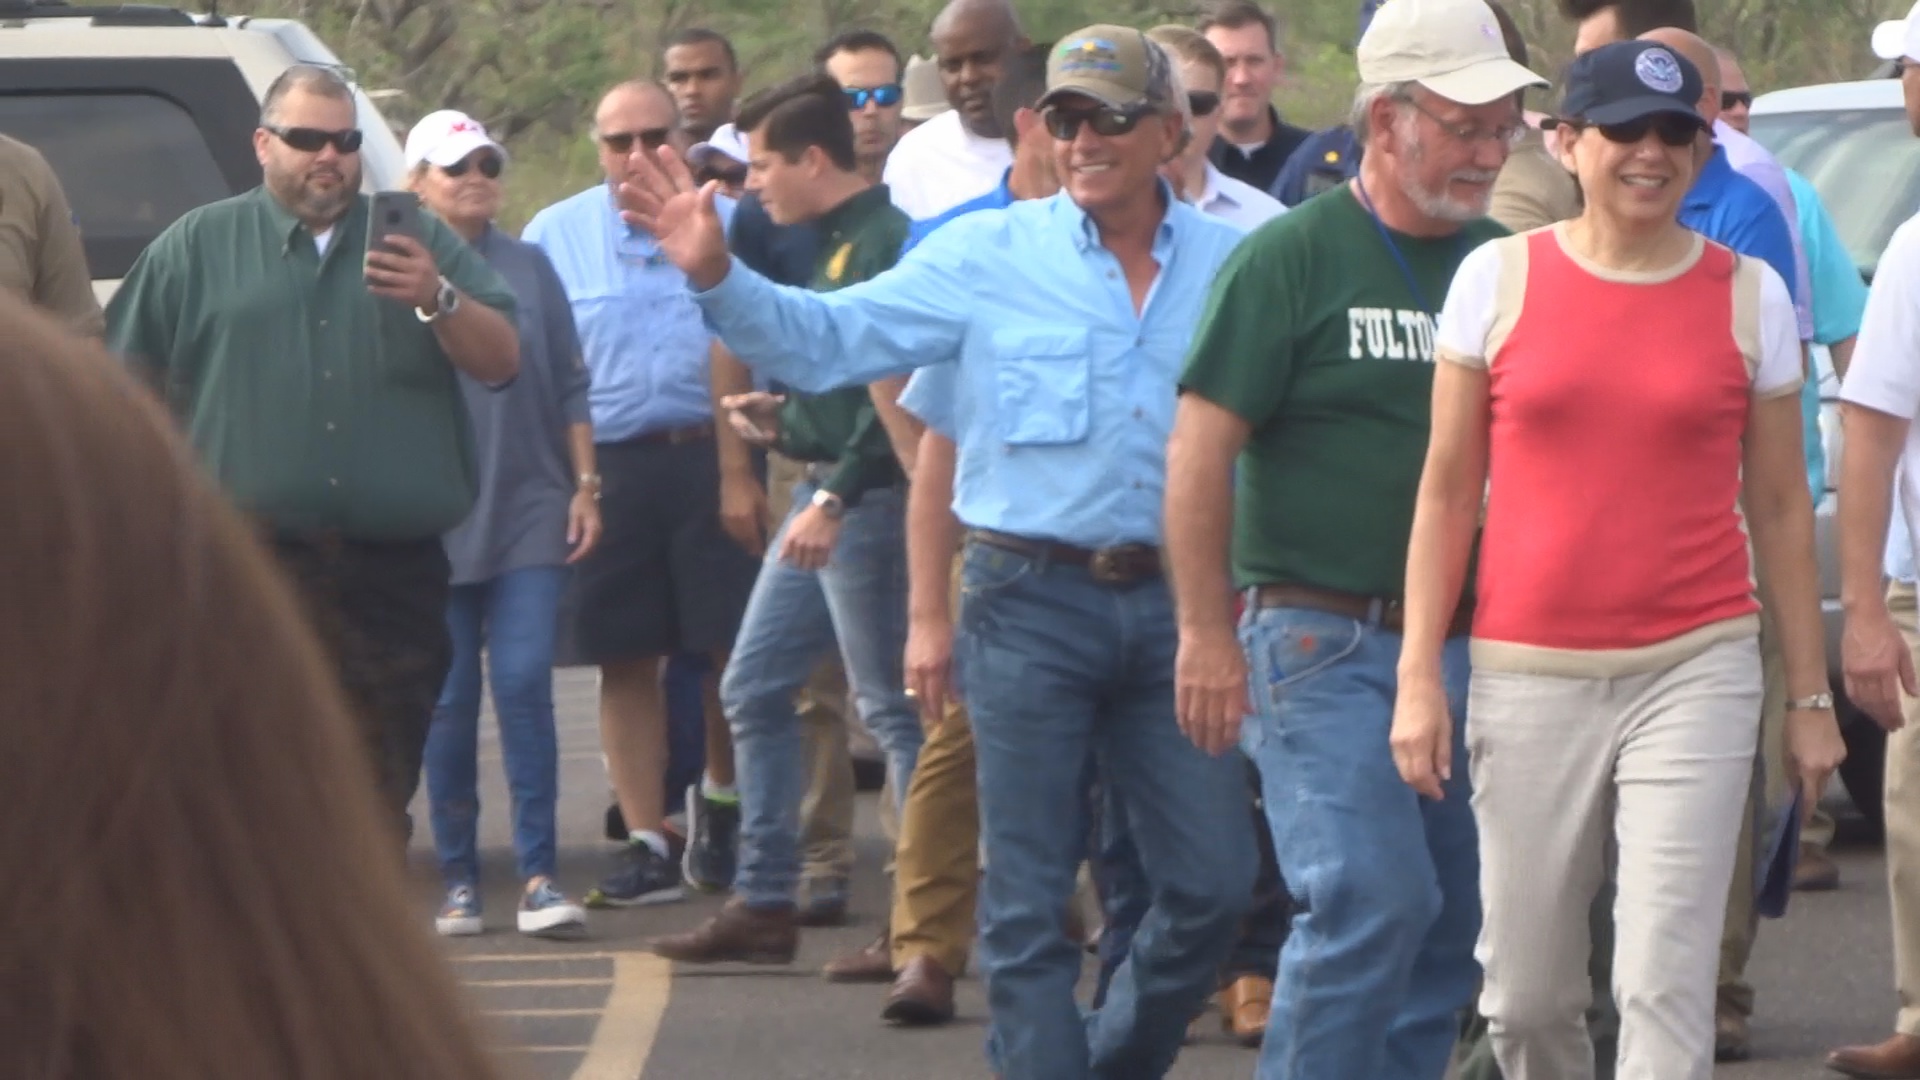 PHOTOS: George Strait joins Texas governor for visit to Rockport